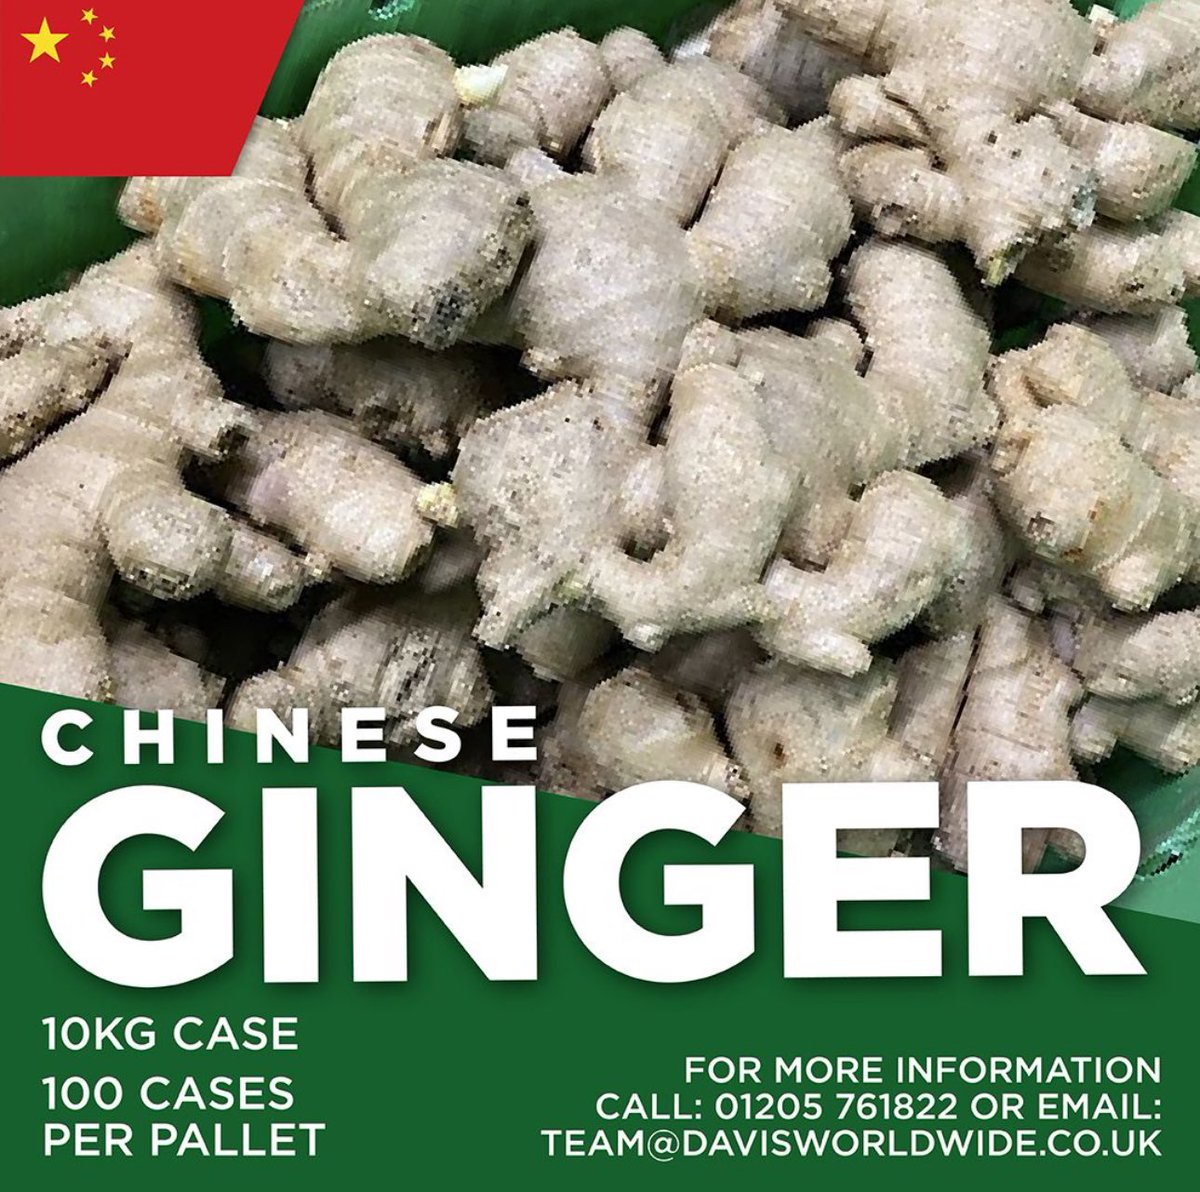 Chinese Root Ginger is now available. The spicy root is used in various foods, drinks and remedies.

Enquire today. Call our team on 01205 761822 or mail team@davisworldwide.co.uk

#ginger #freshginger #gingerroot #rootginger #spices #asian #asiancuisine #herbal #spicy #catering